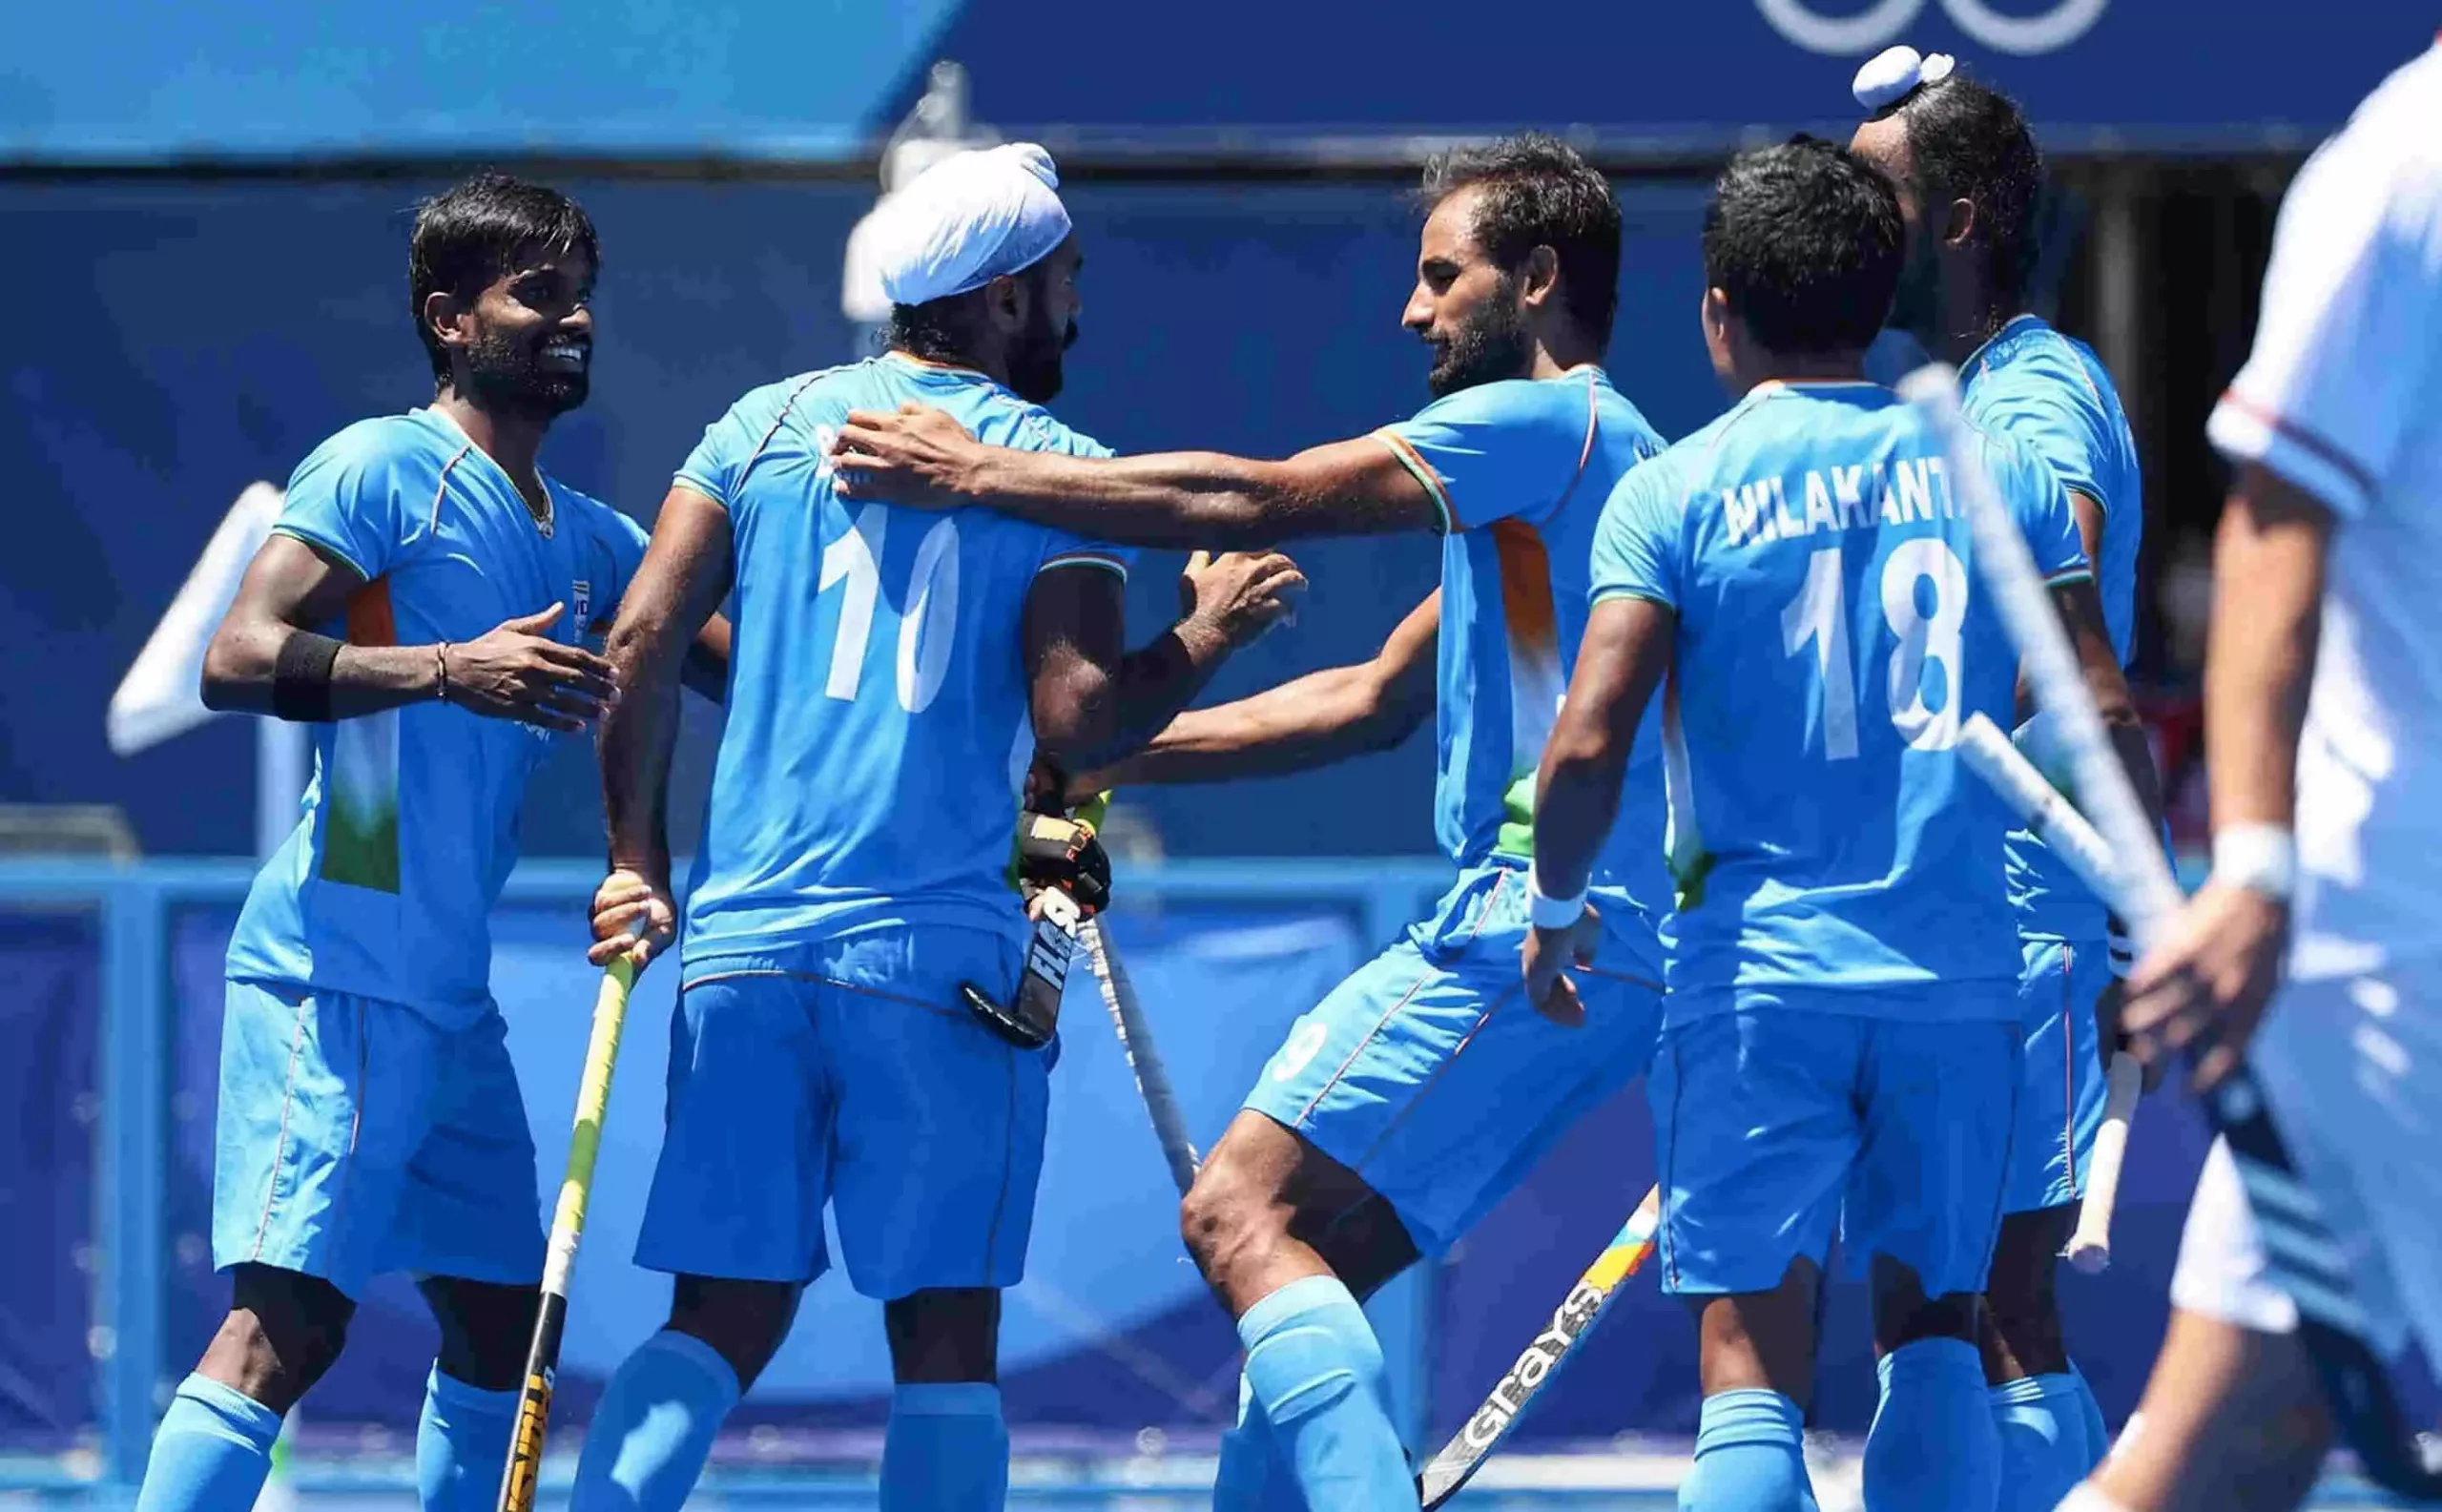 Hockey Asia Cup begins today with Pakistan vs India.